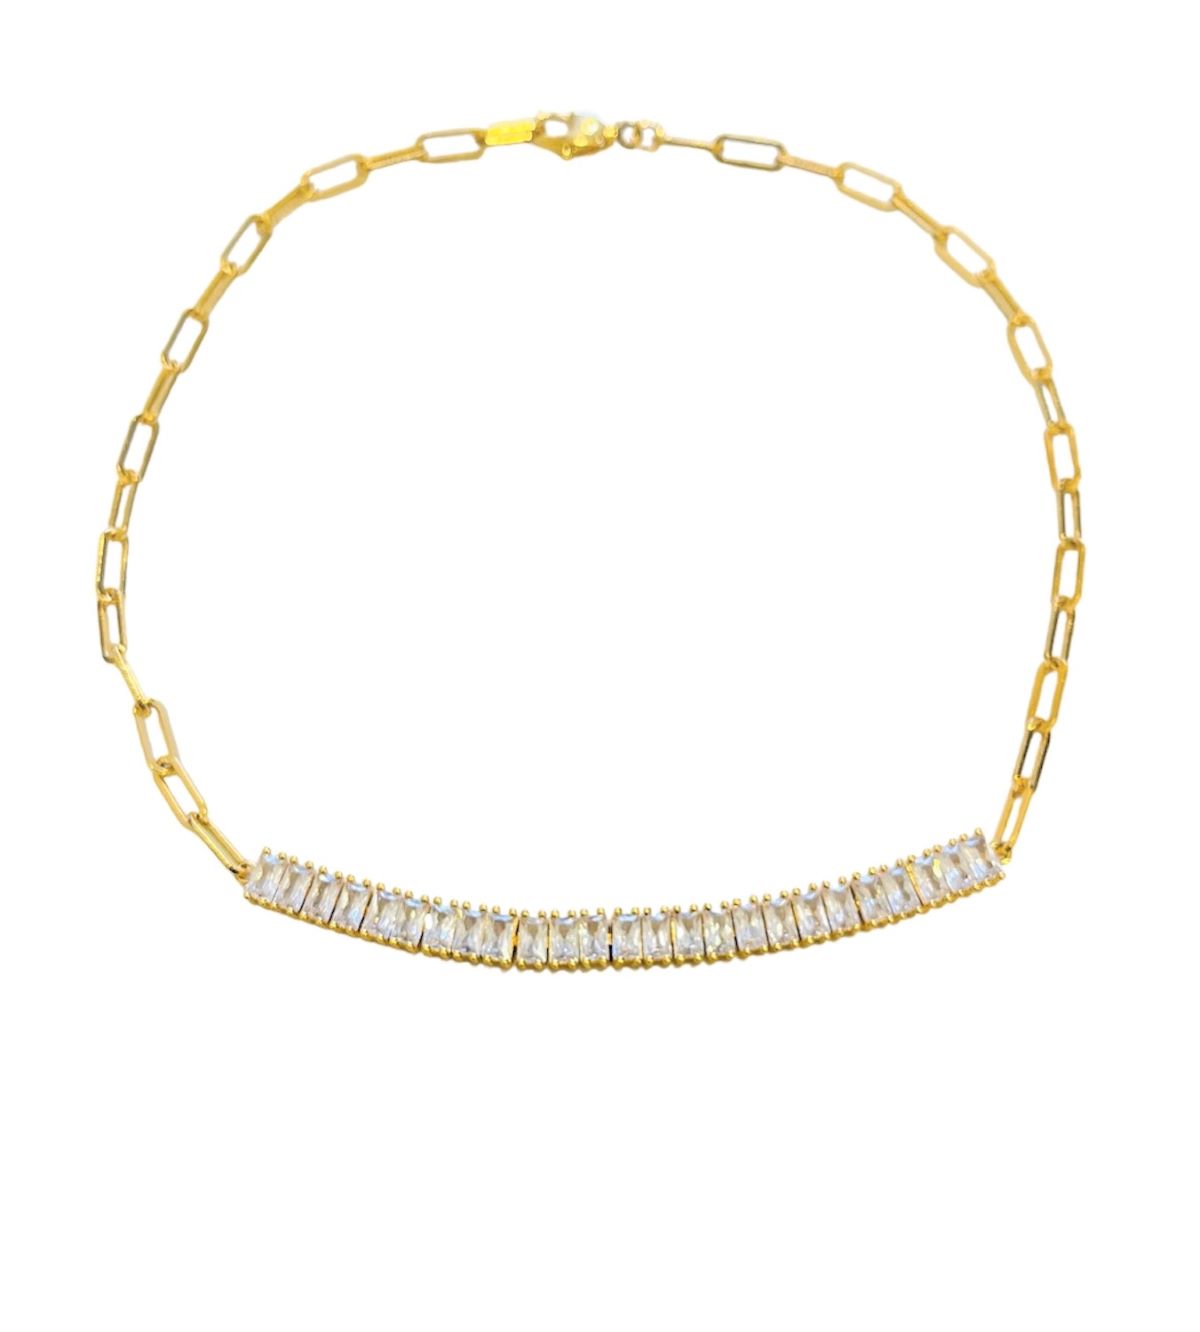 NECKLACE LINKS BAQUETTE GOLD